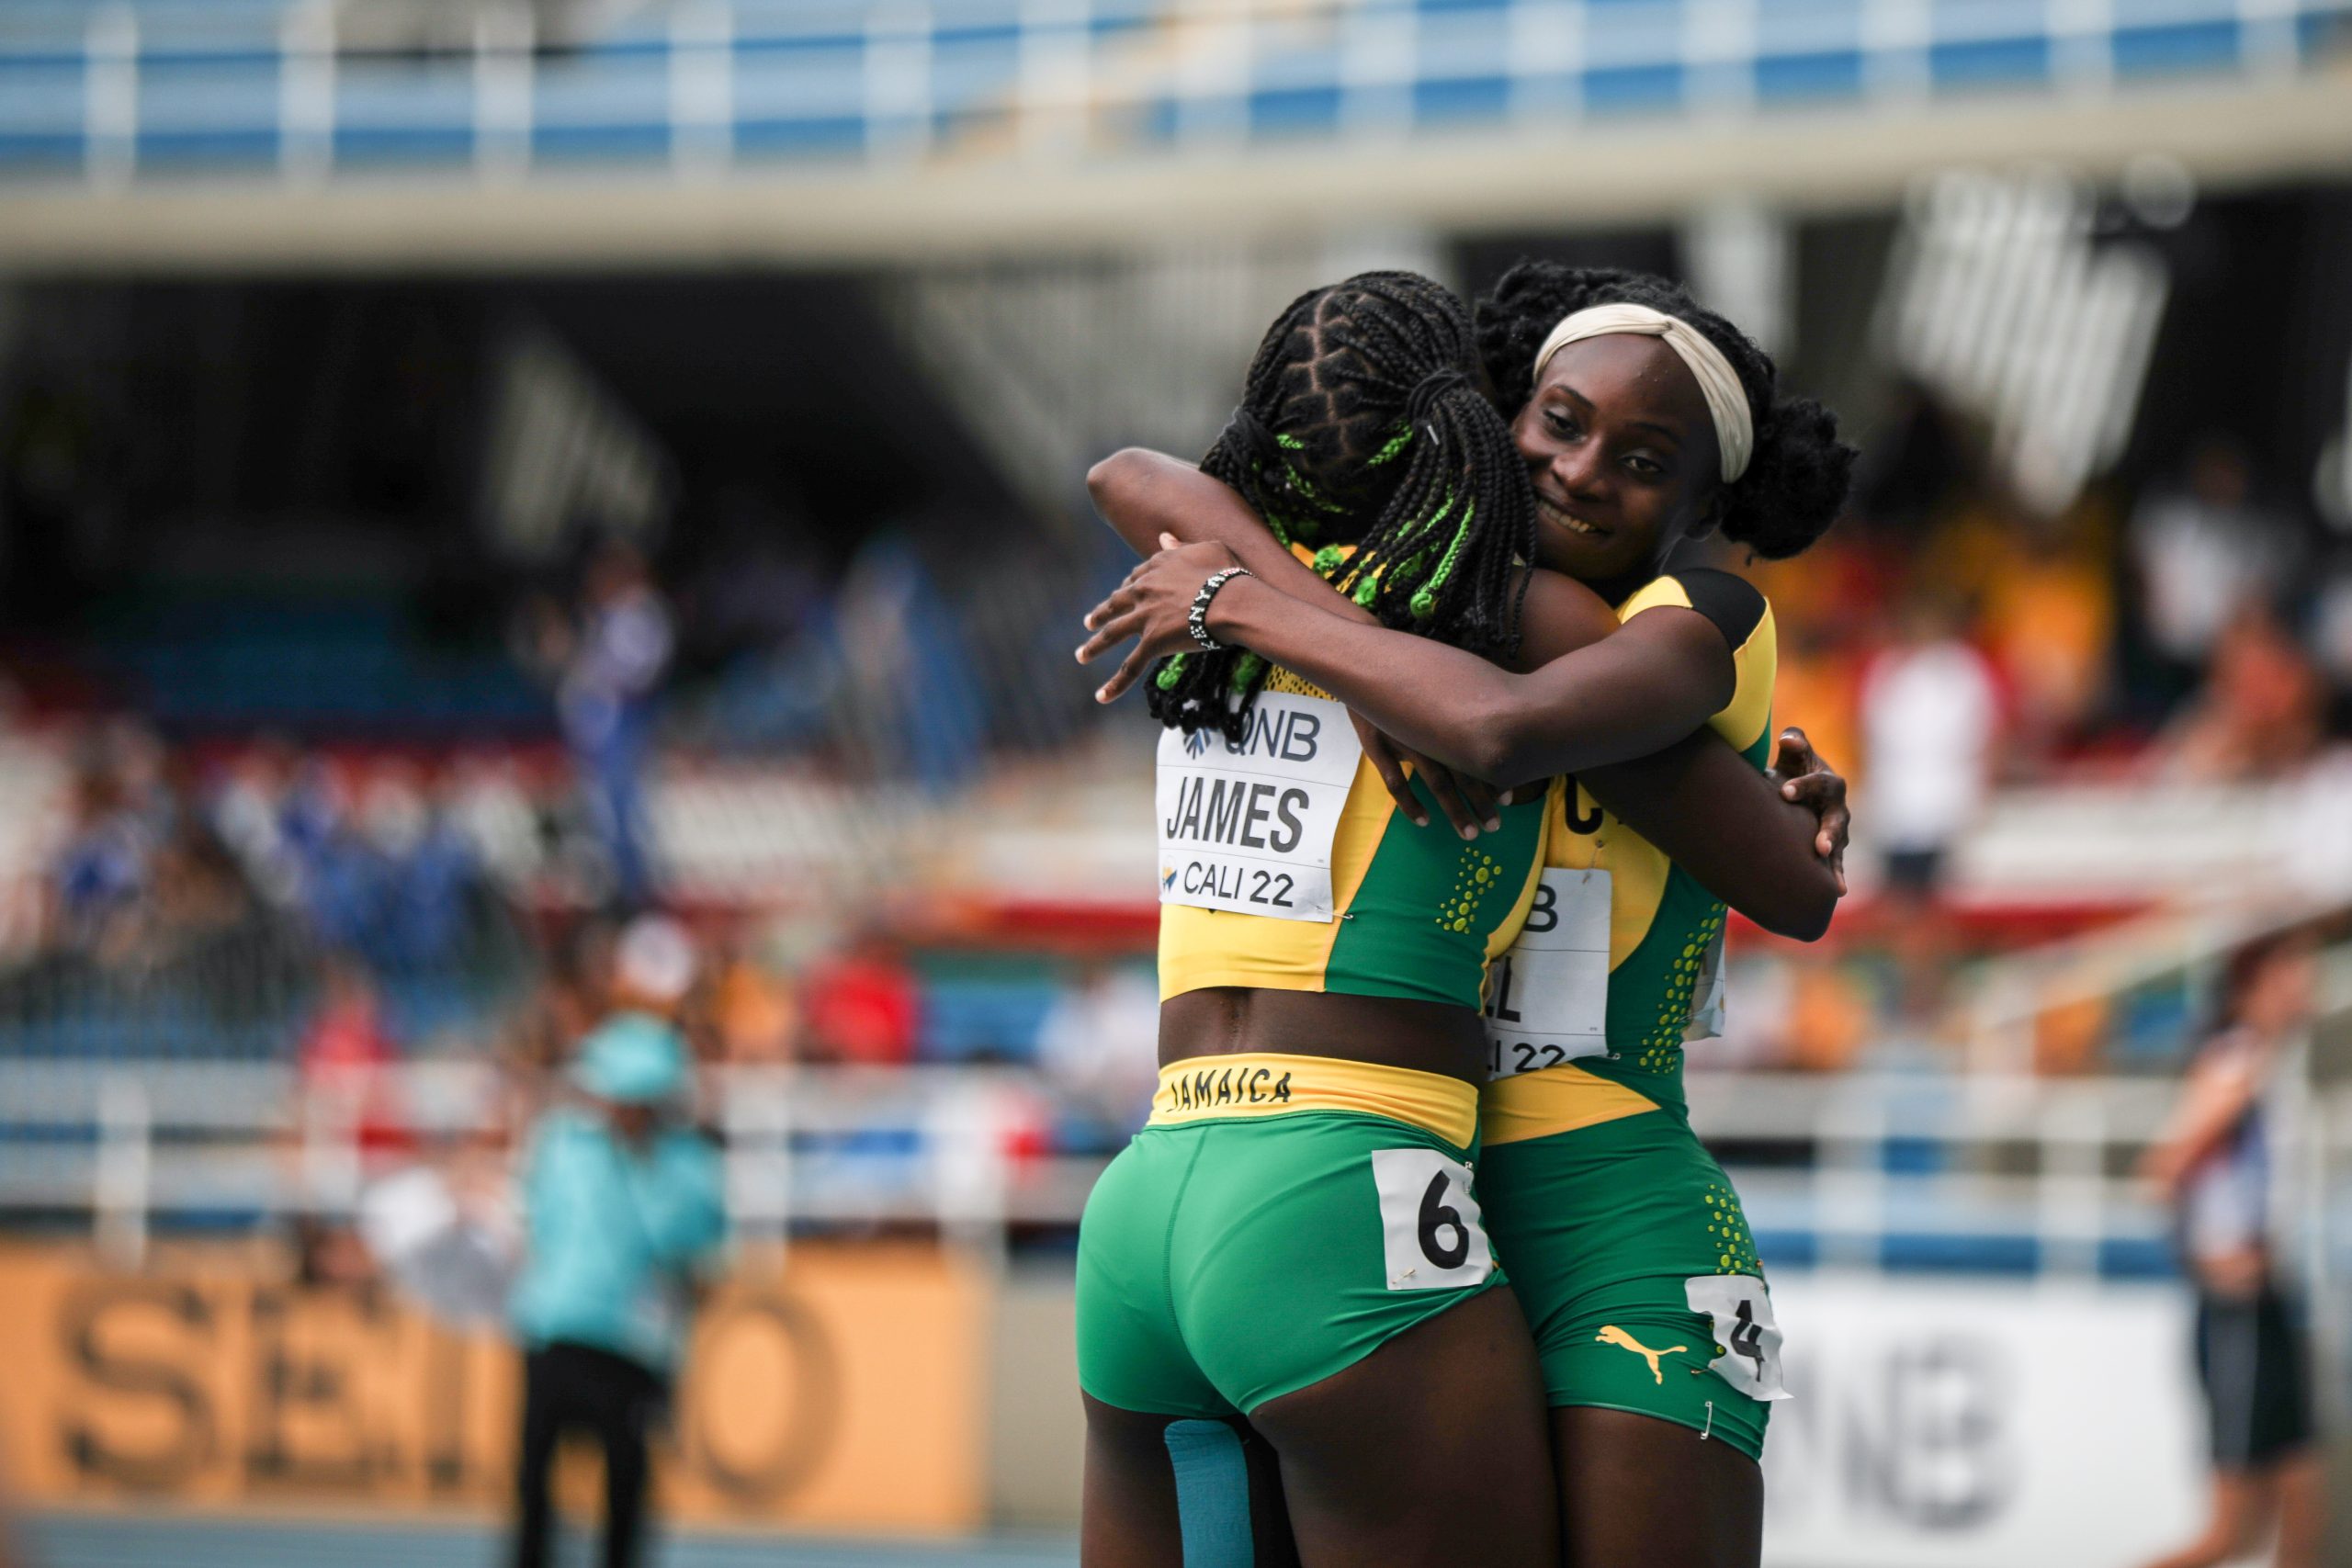 Kerrica Hill and Alexis James celebrate 1-2 finish in the women's 100m hurdles on the final day of the World Athletics U20 Championships